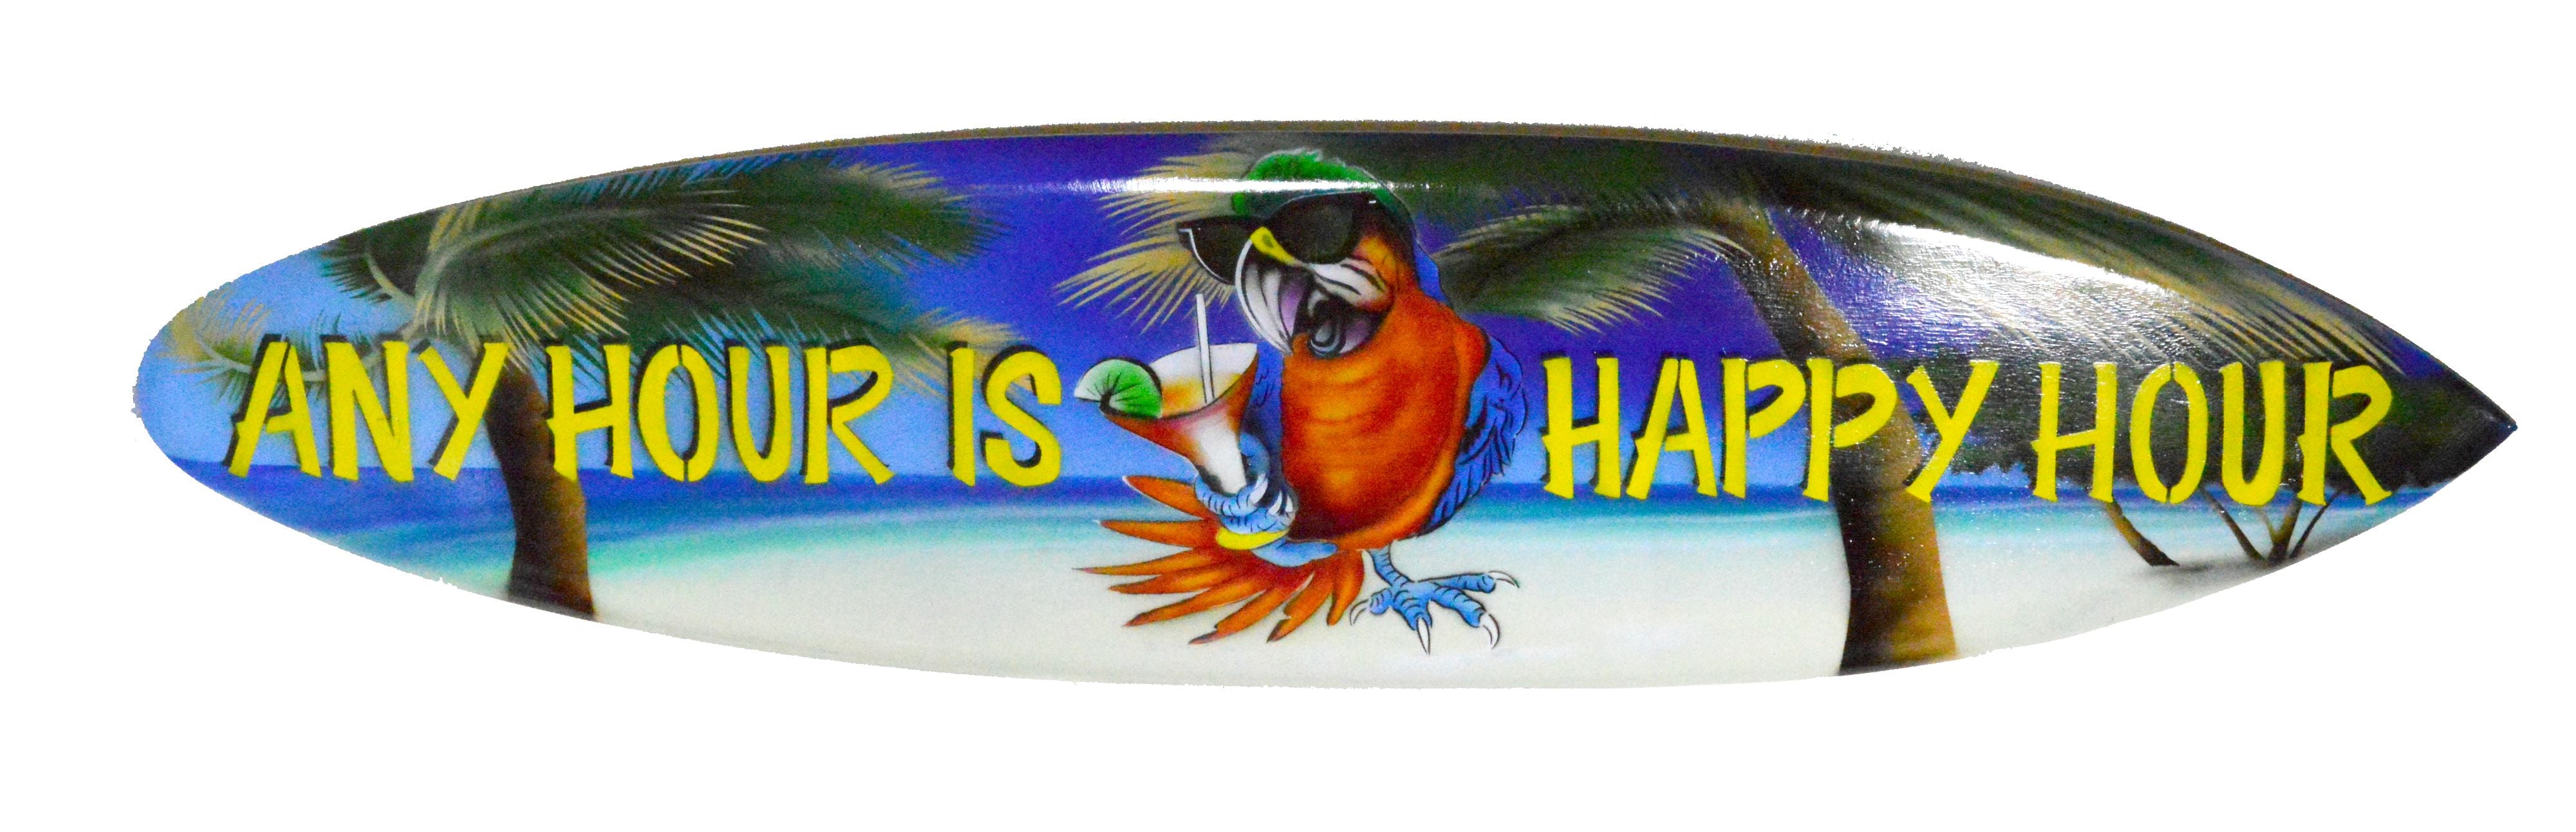 Any hour is happy hour with this airbrushed faux surfboard tropical colors sign in the shape of a surboard with polly the parrot drinking a cocktail